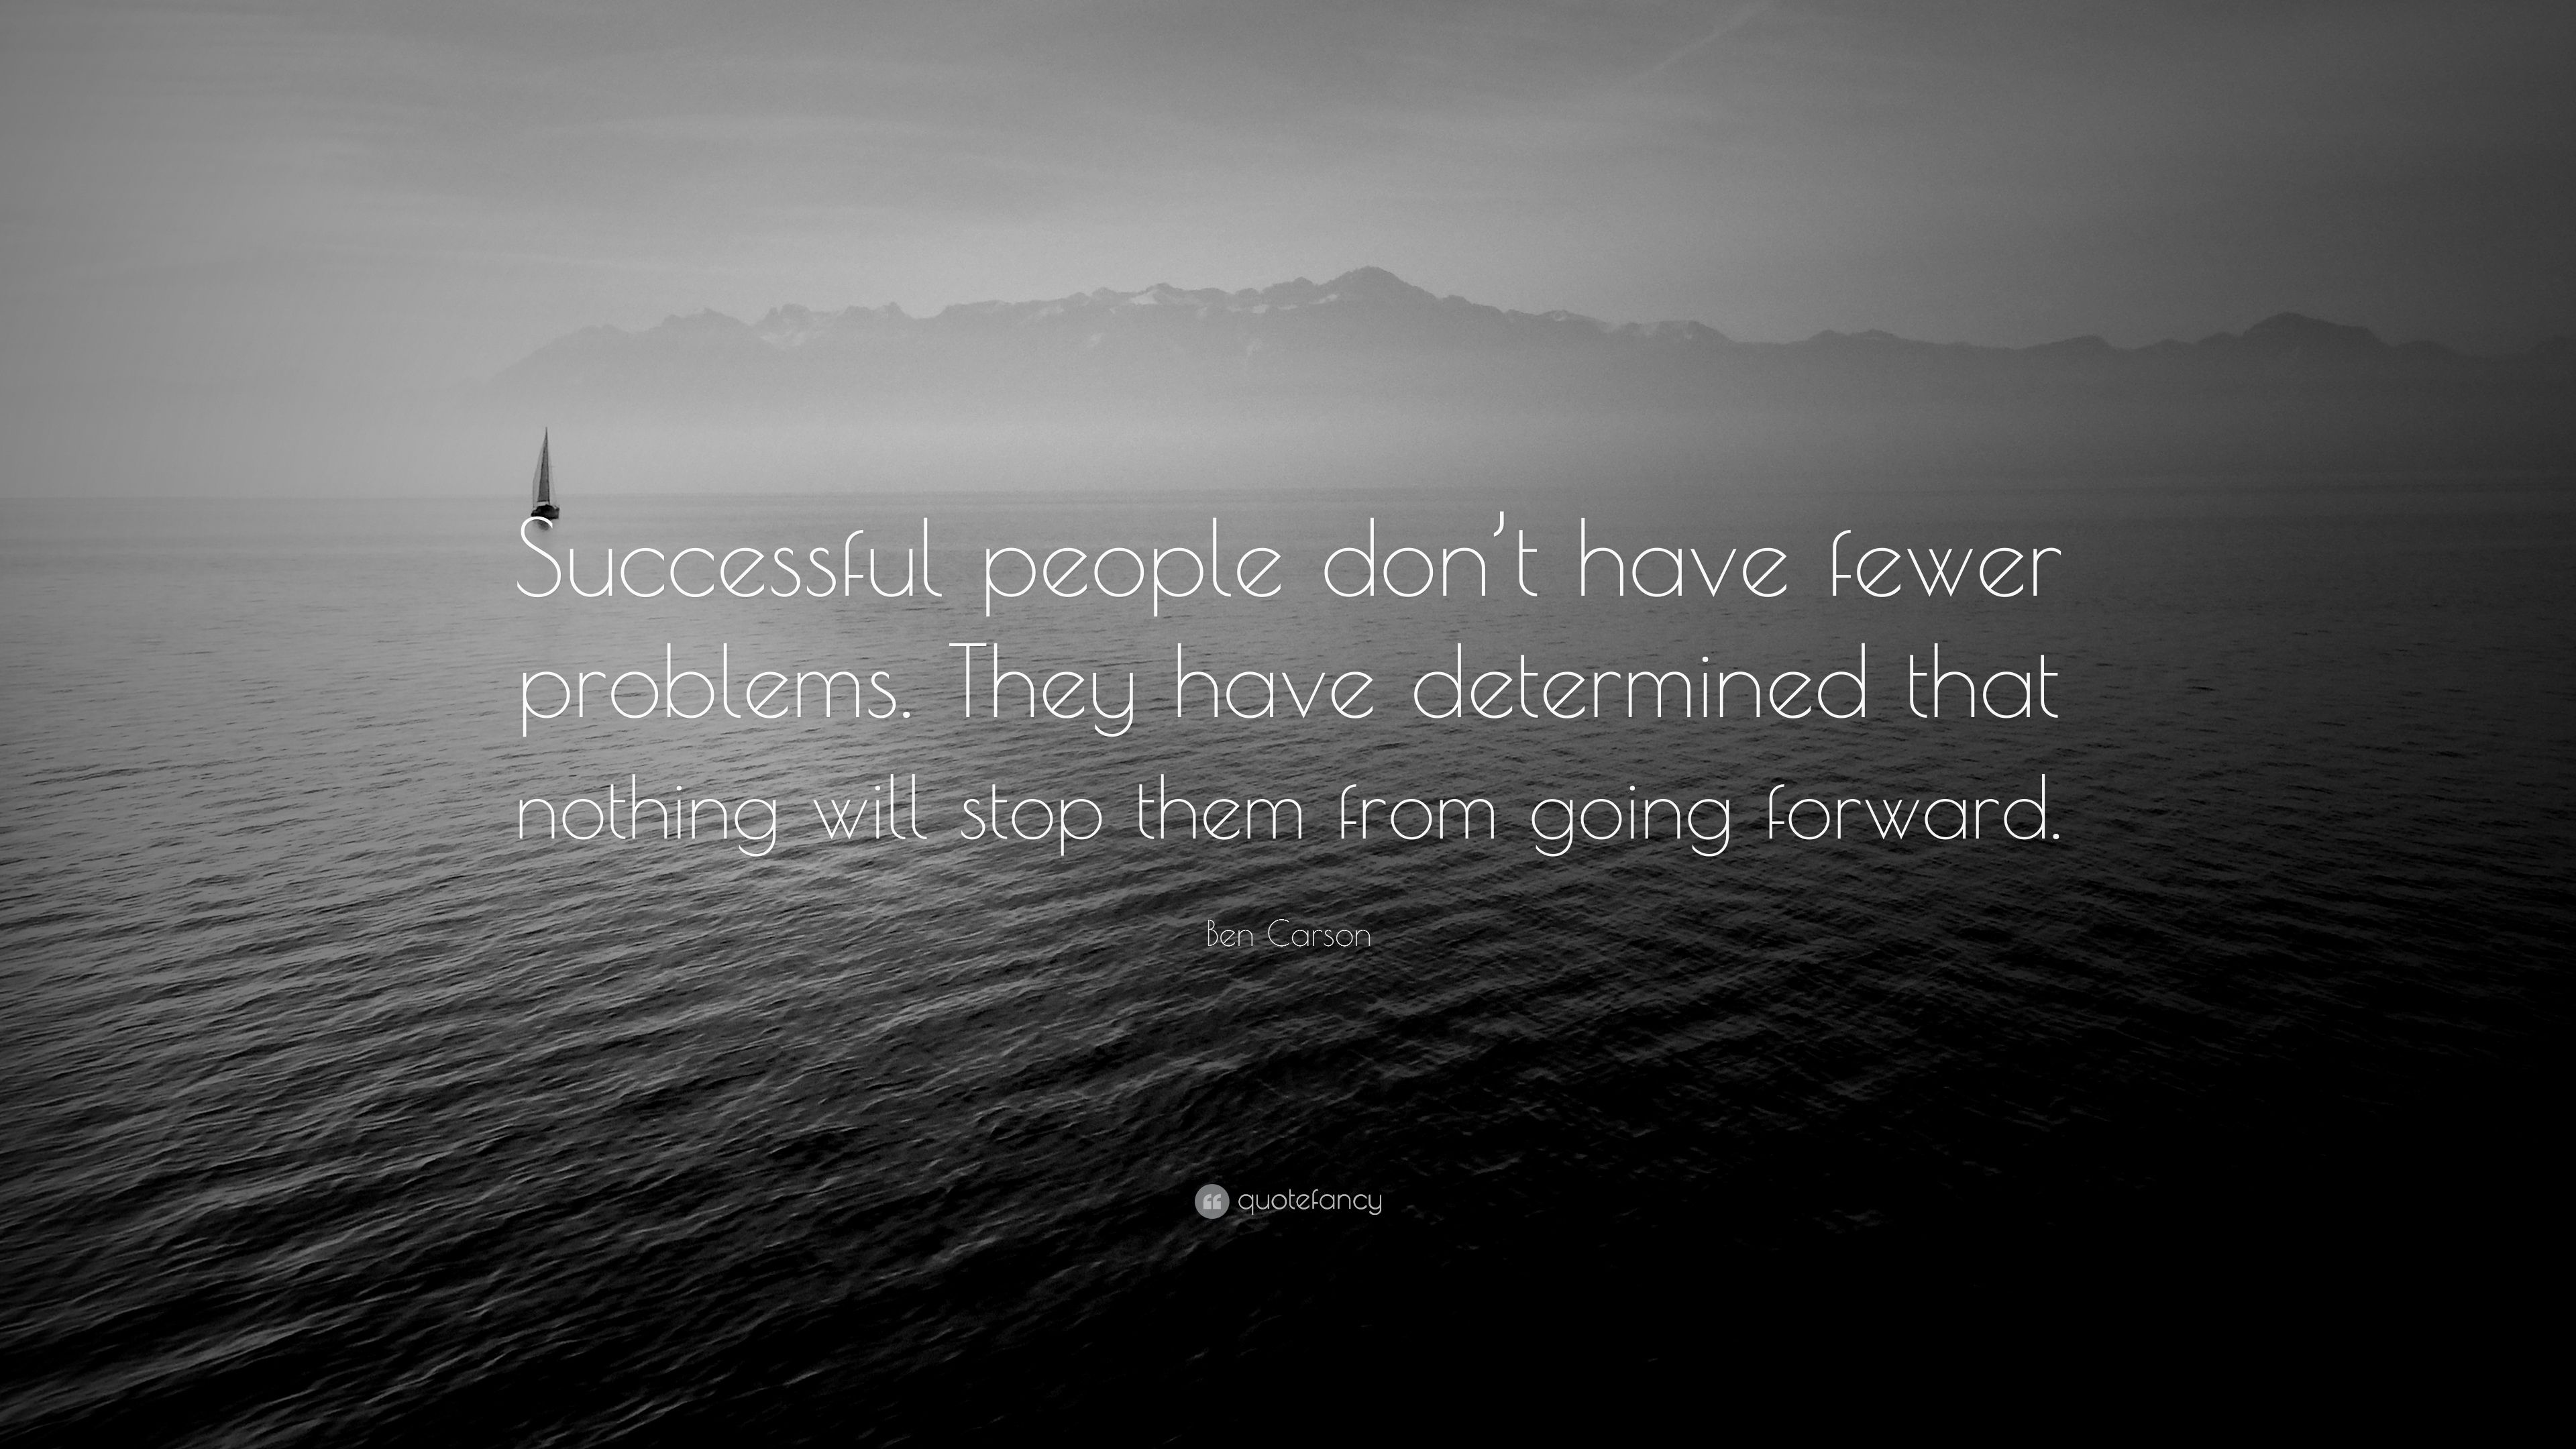 Ben Carson Quote: “Successful people don't have fewer problems. They have determined that nothing will stop them from going forward.” (22 wallpaper)